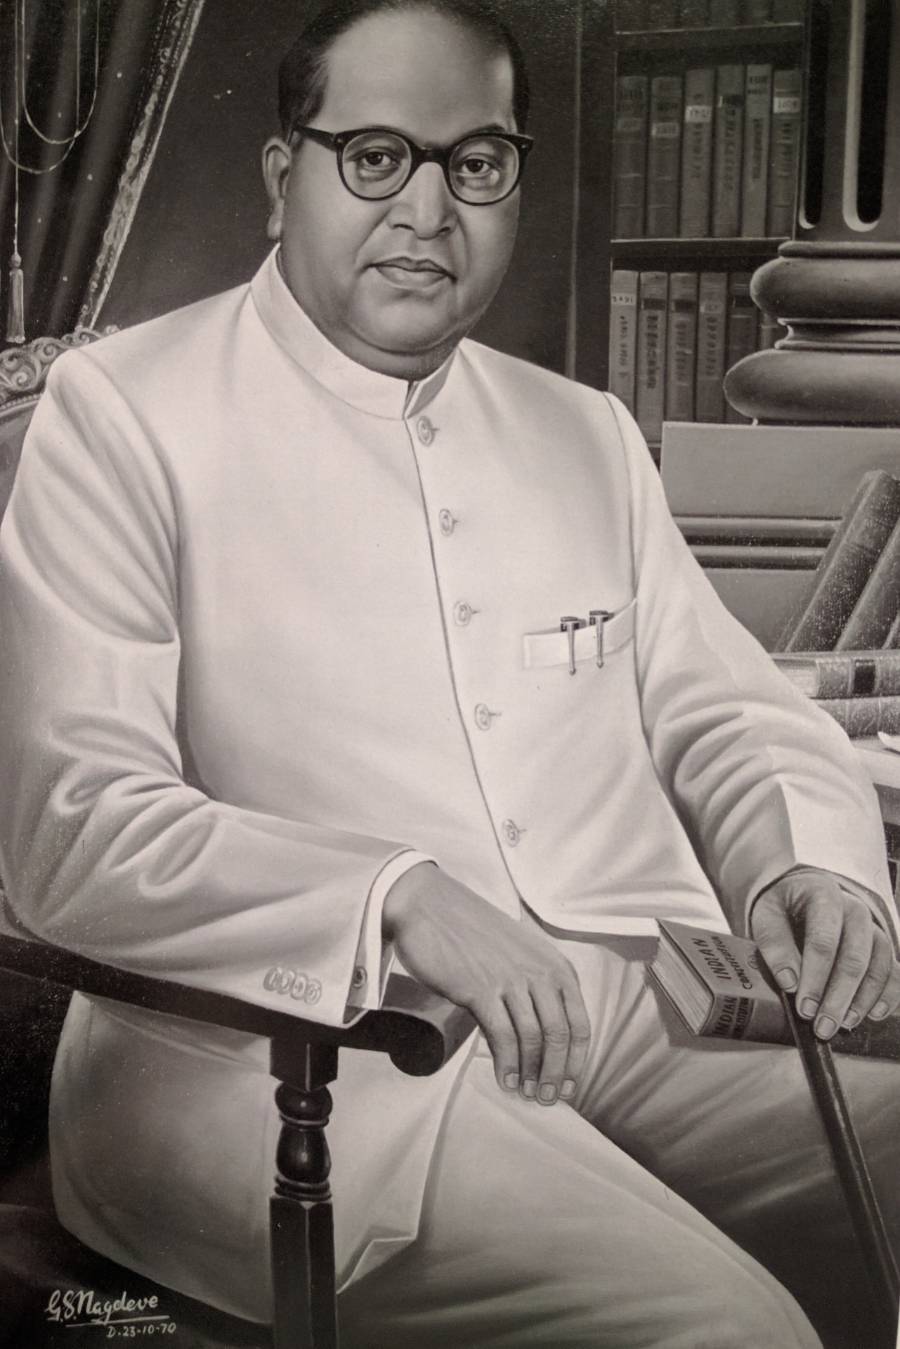 A portrait of Ambedkar sitting in a chair in front of bookshelves